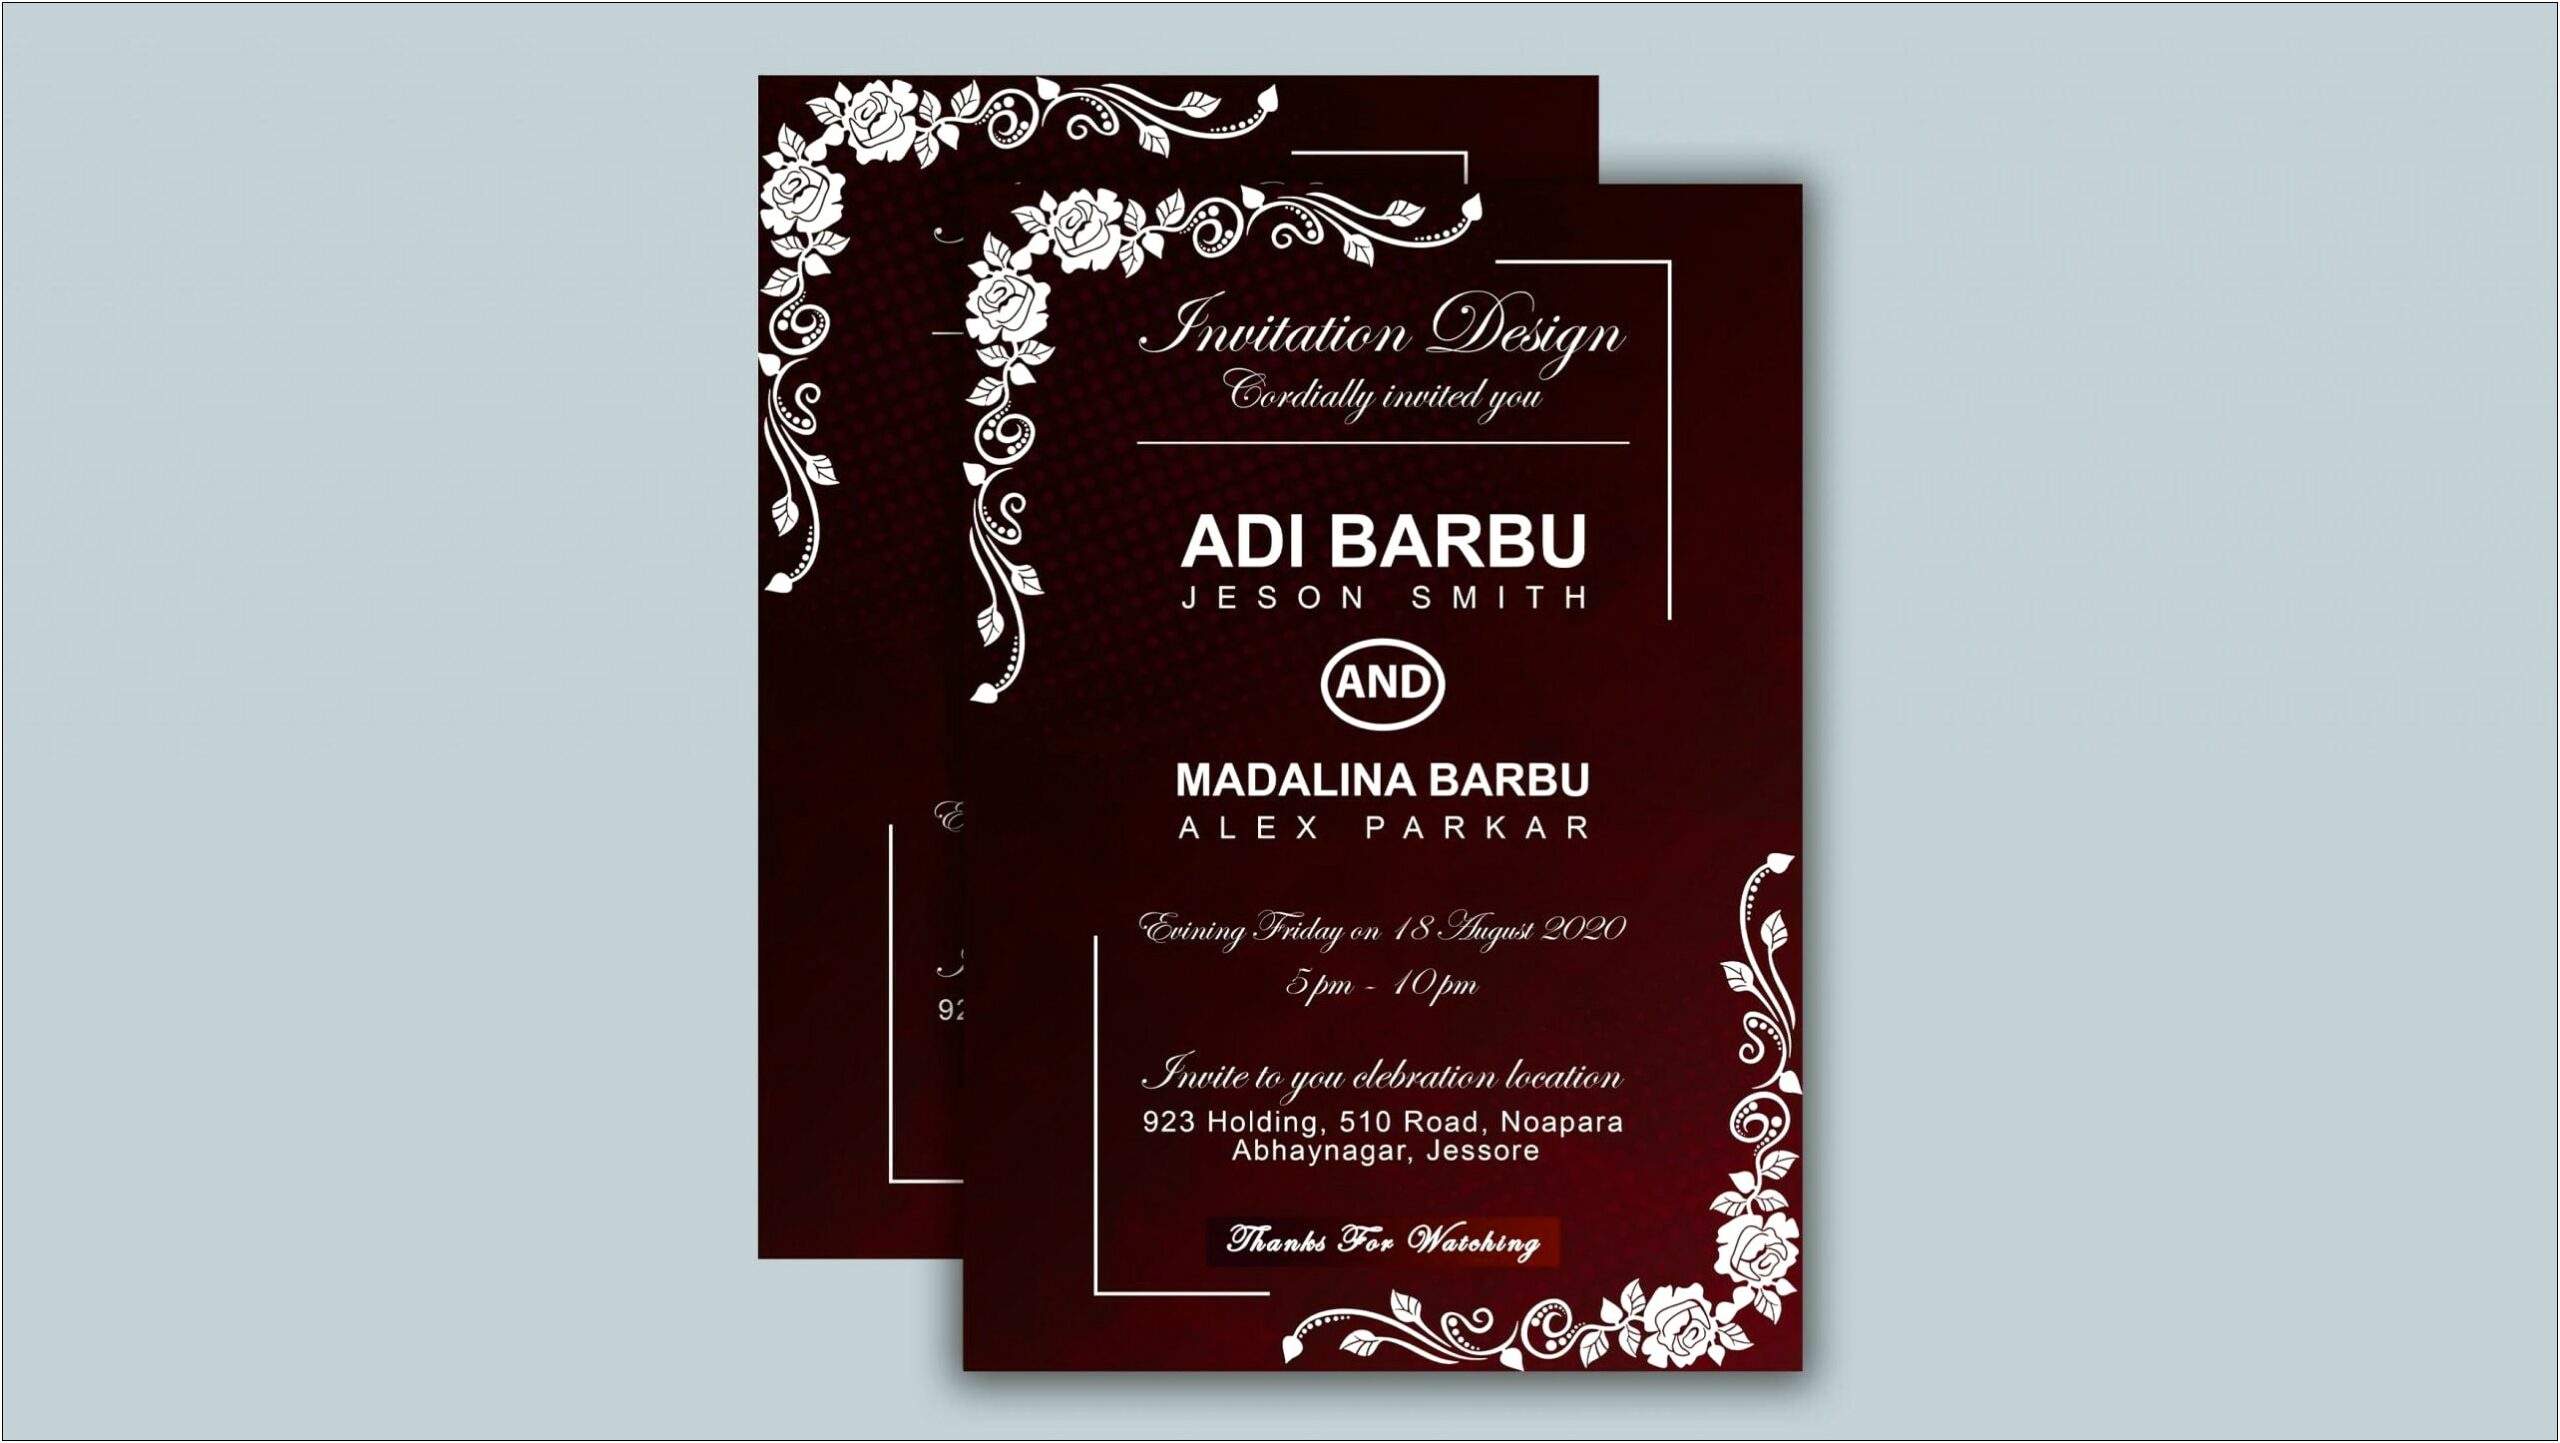 Wedding Invitation Card Images Free Download